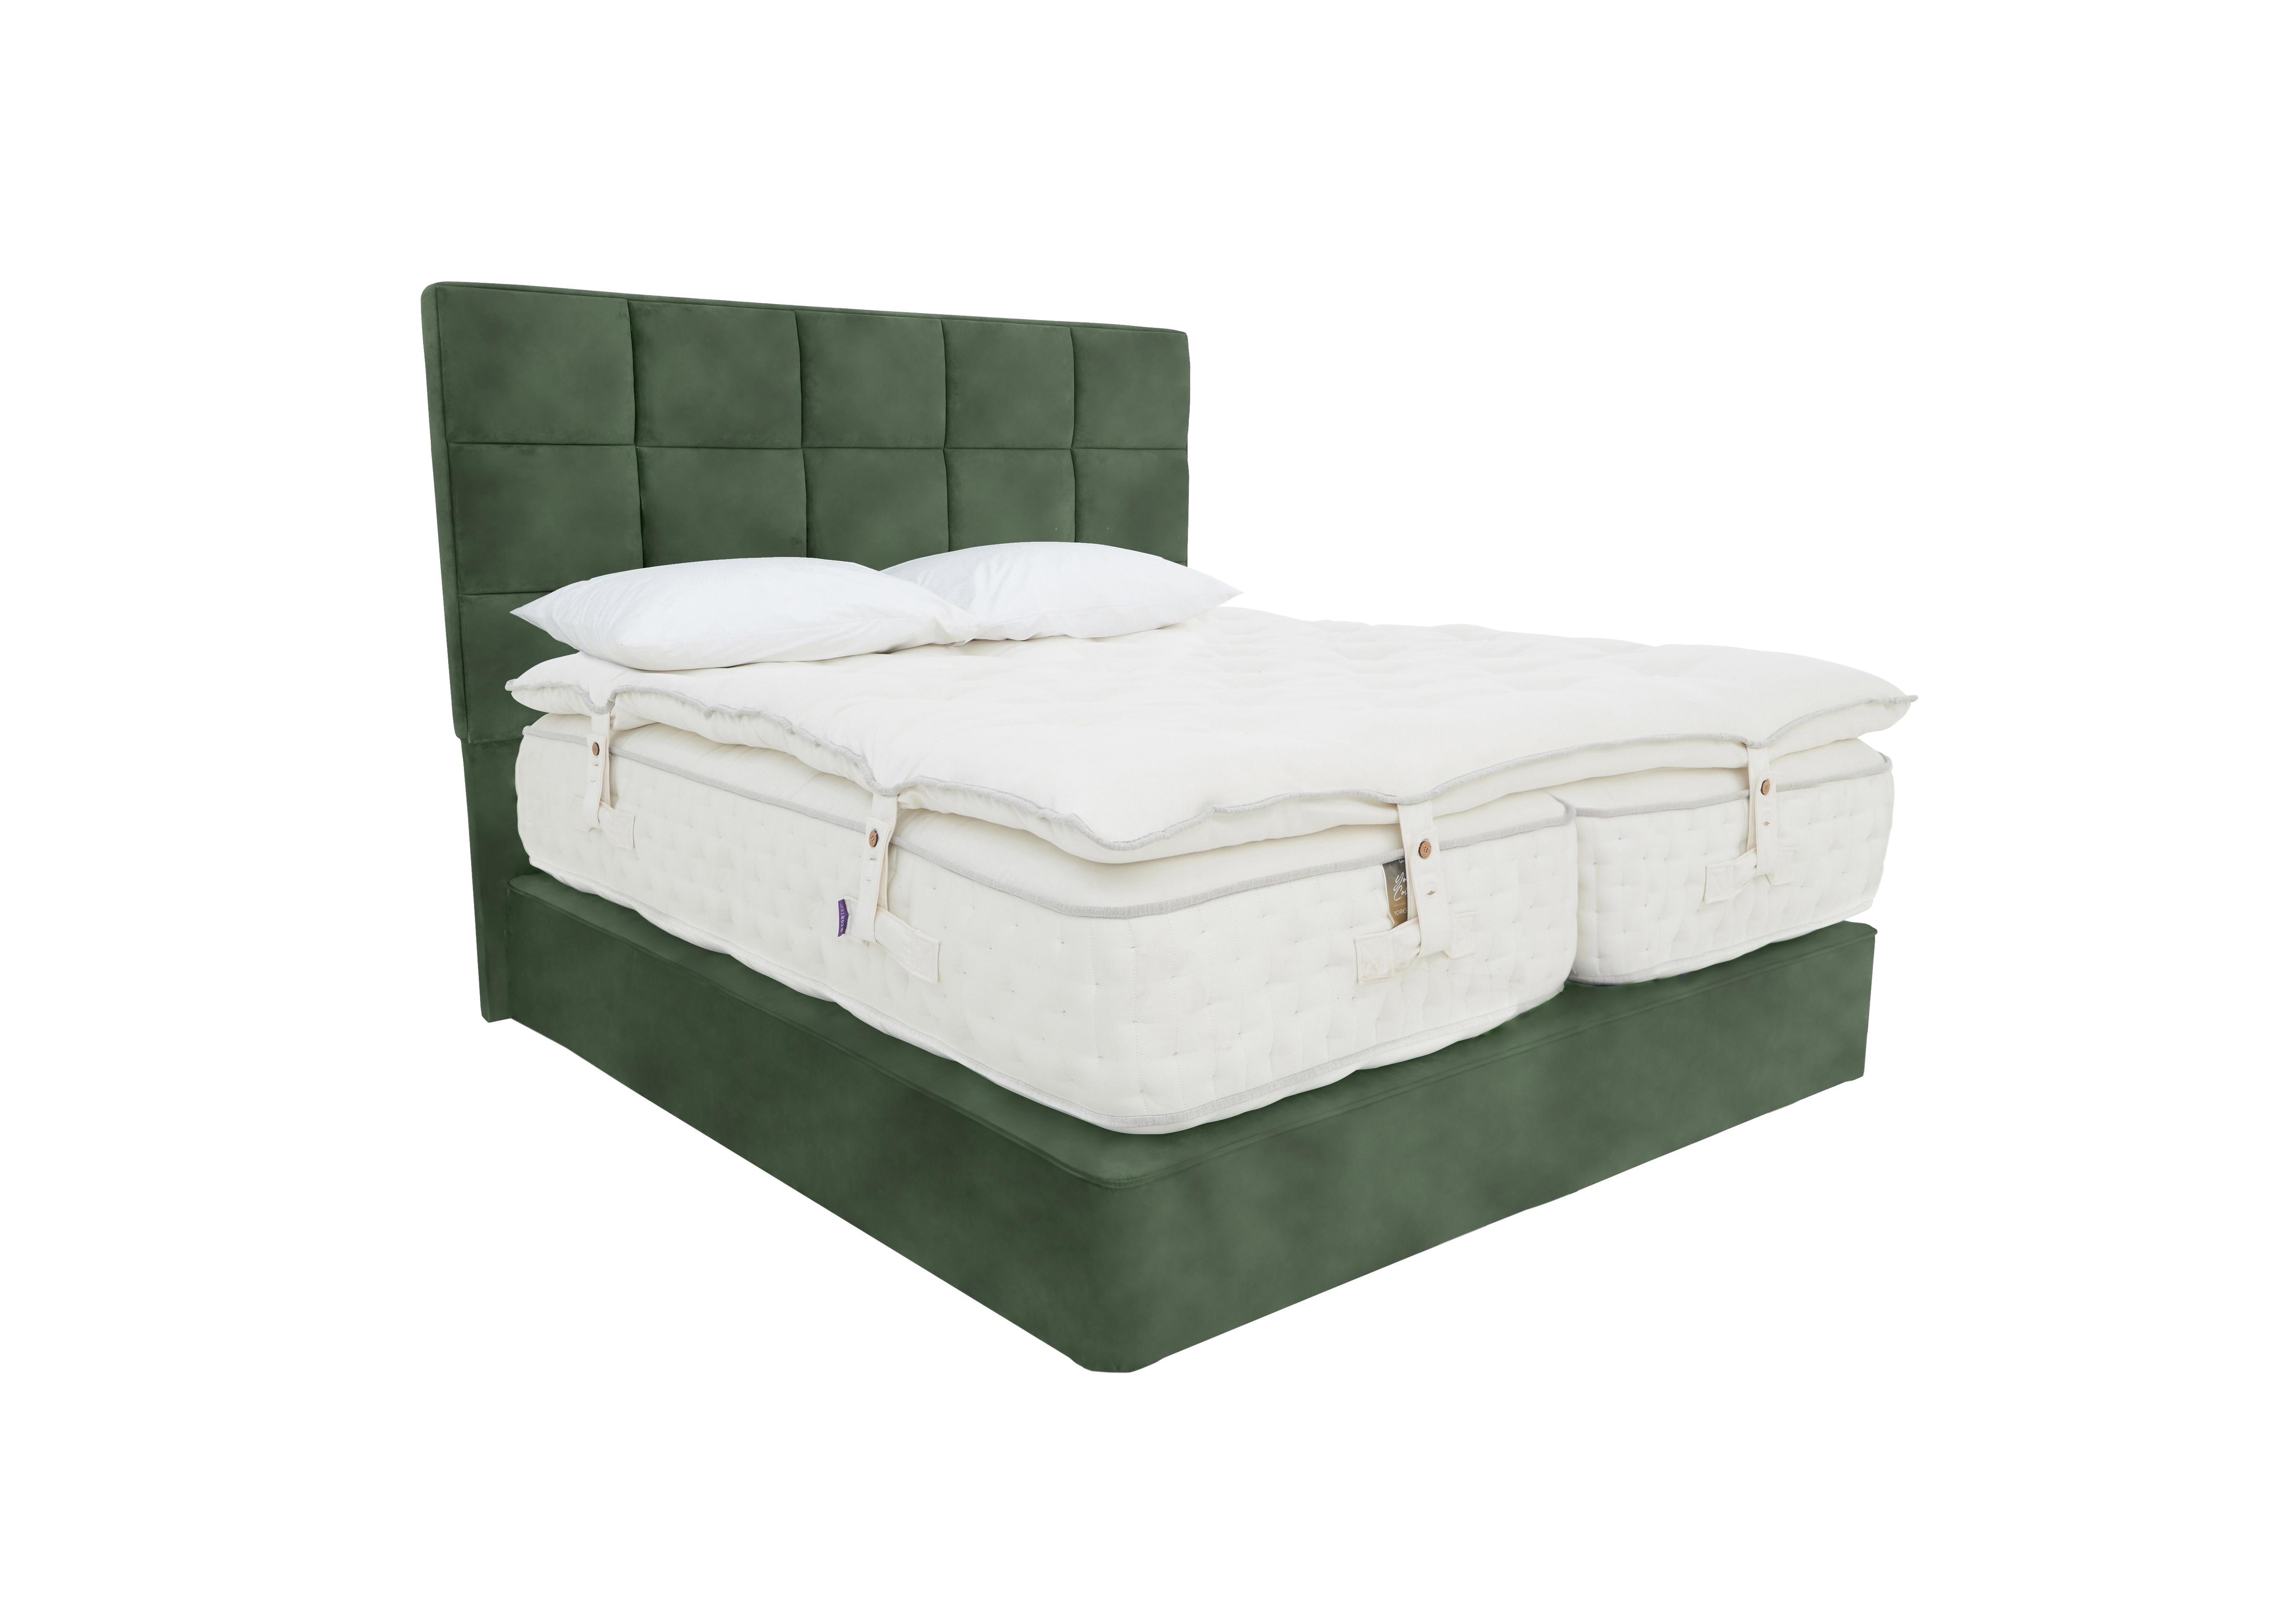 Yorkshire 30K Divan Set with Zip and Link Mattress with Mattress Topper in Lovely Conifer on Furniture Village